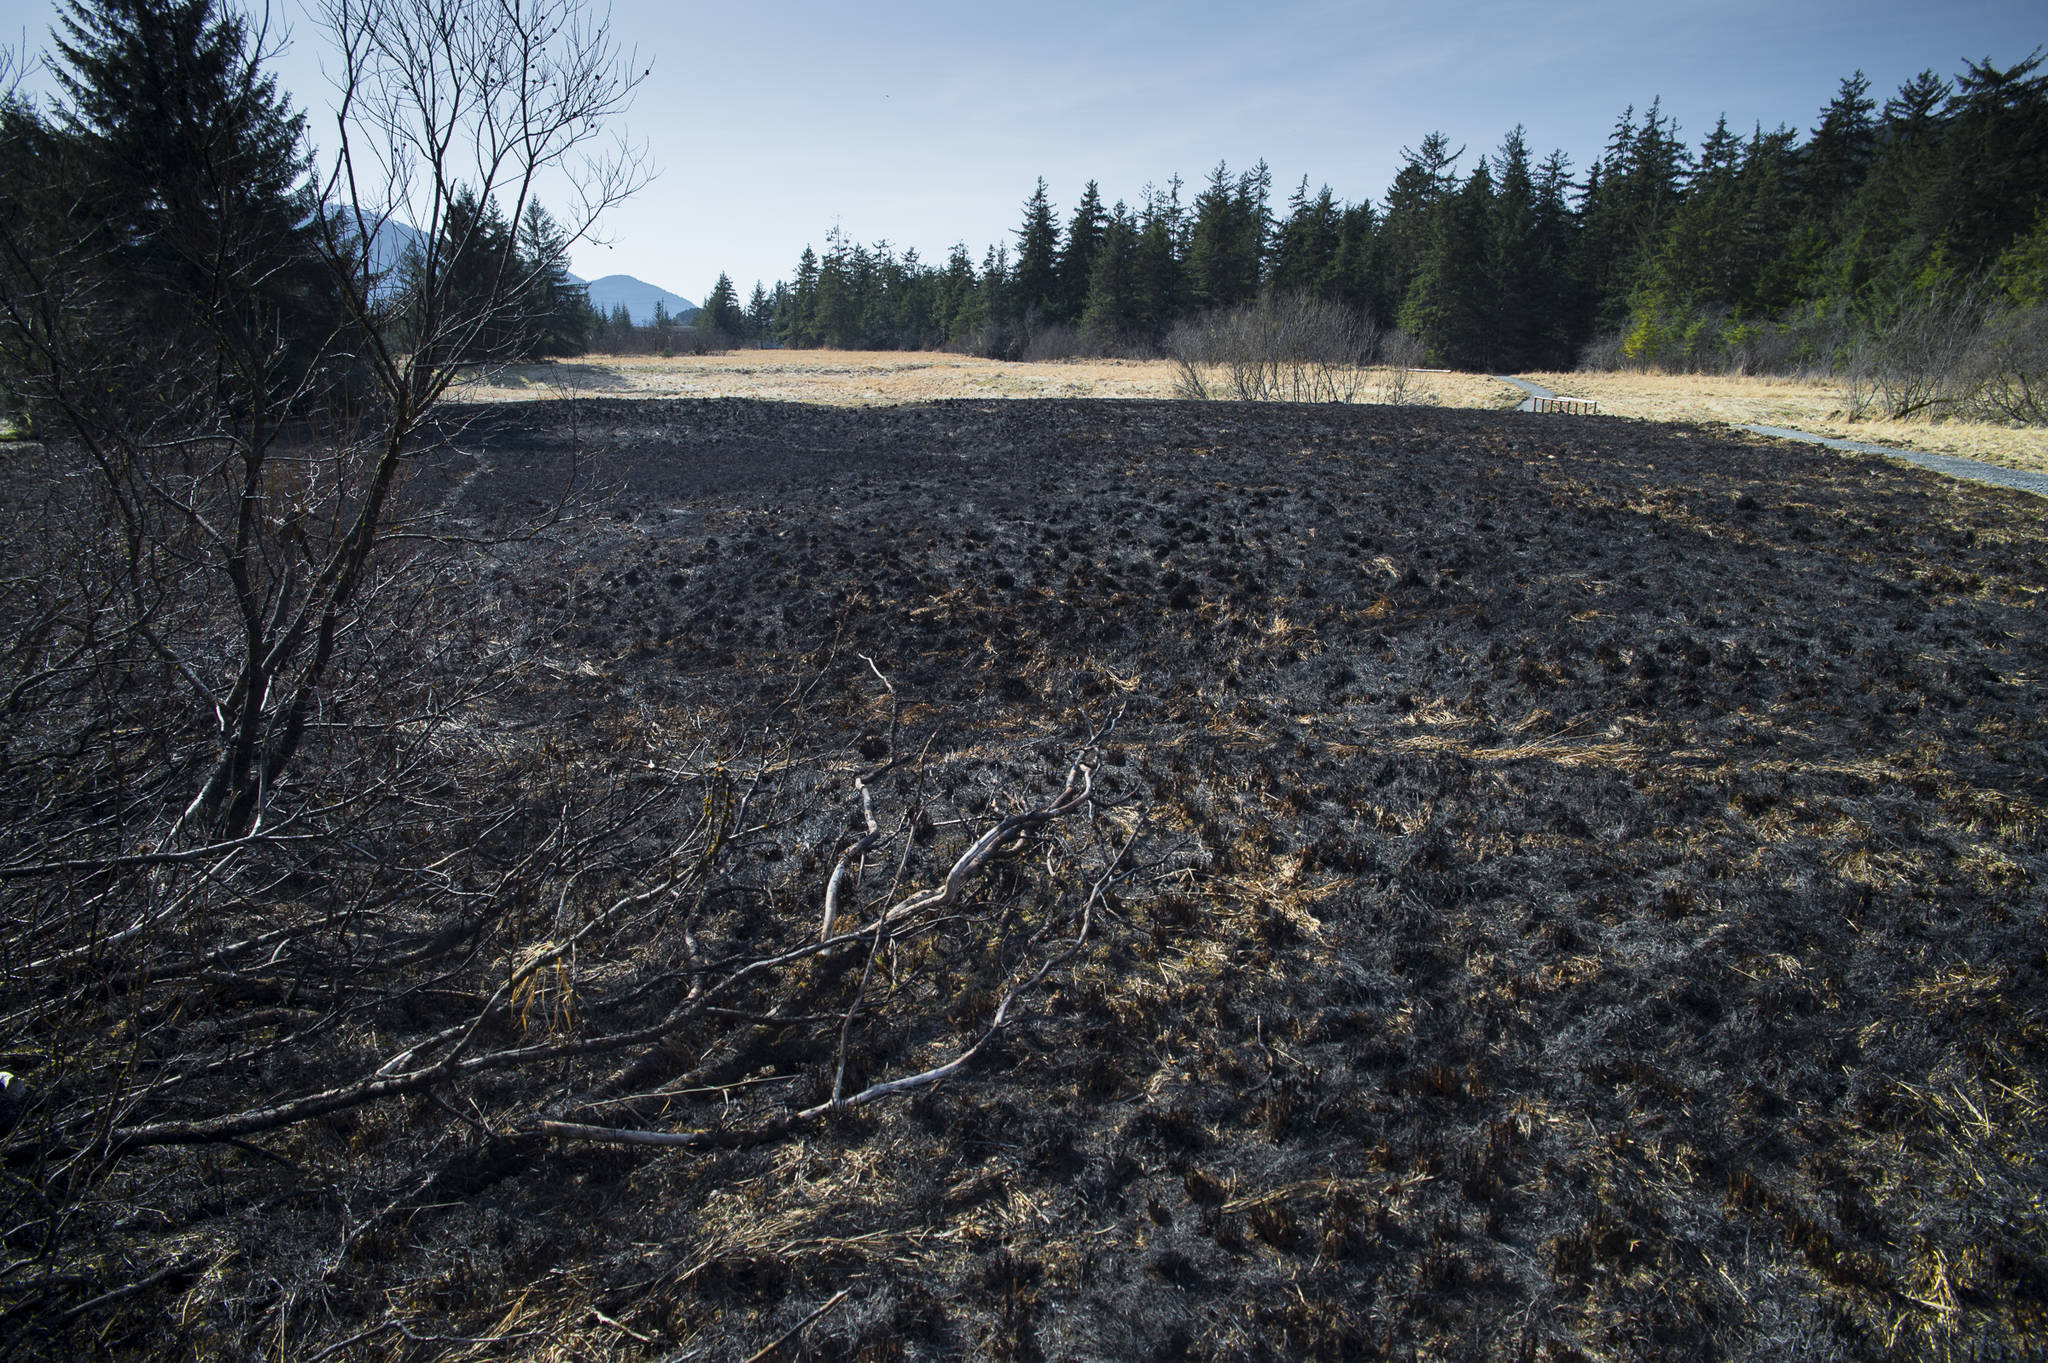 A 400-foot by 400-foot area of burned grass area next to the Davis Meadows Trail in Switzer Creek on Tuesday, April 2, 2019. The fire was reported on Sunday, March 31, and put out by Capitol City Fire/Rescue. (Michael Penn | Juneau Empire)